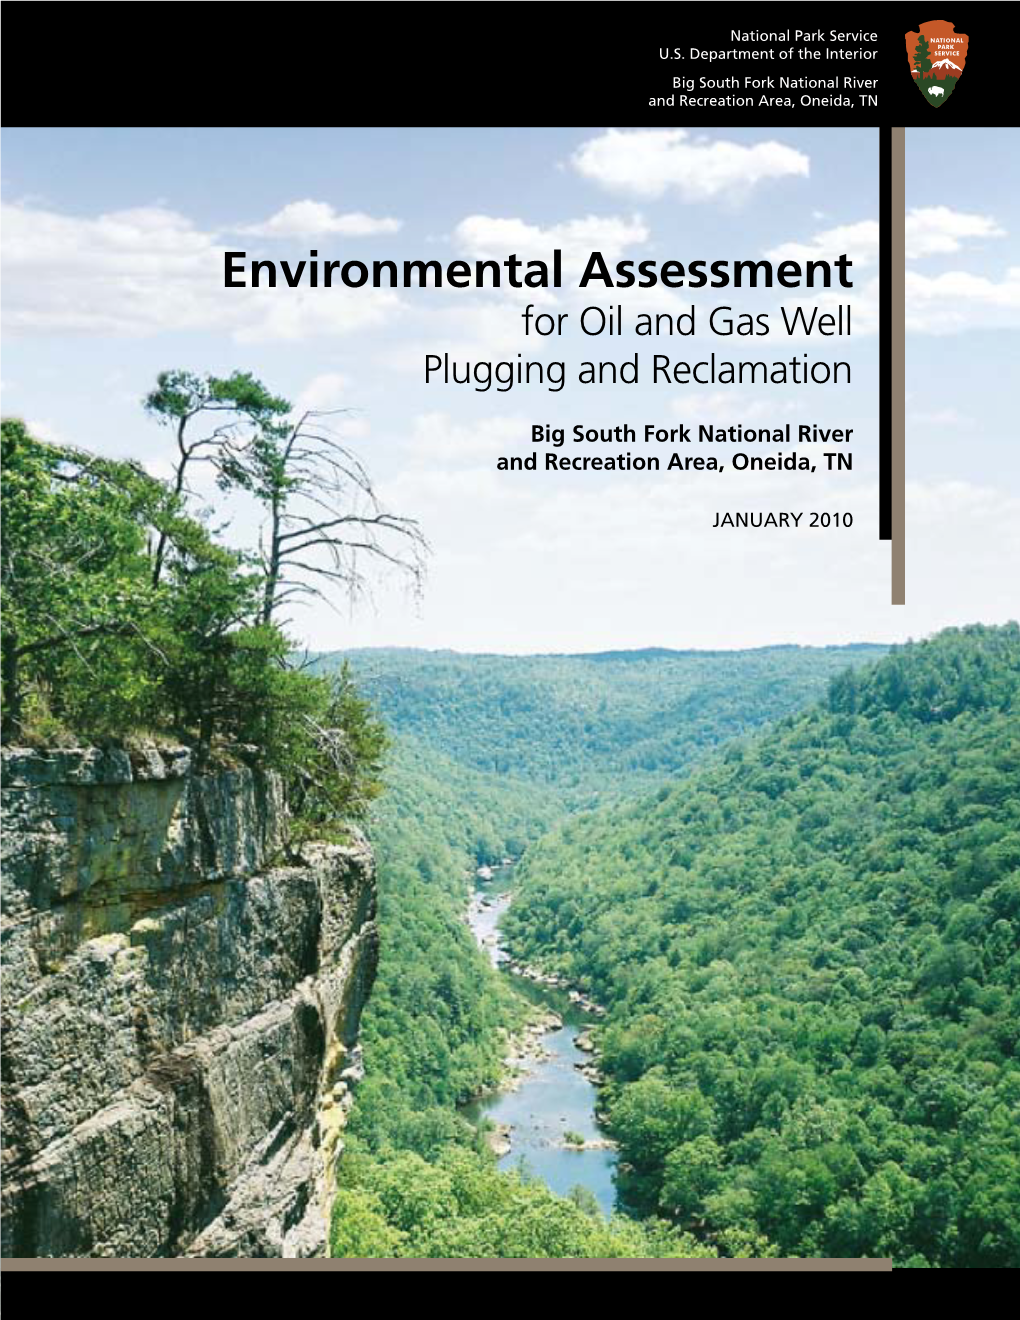 Environmental Assessment for Oil and Gas Well Plugging and Reclamation, Big South Fork National River